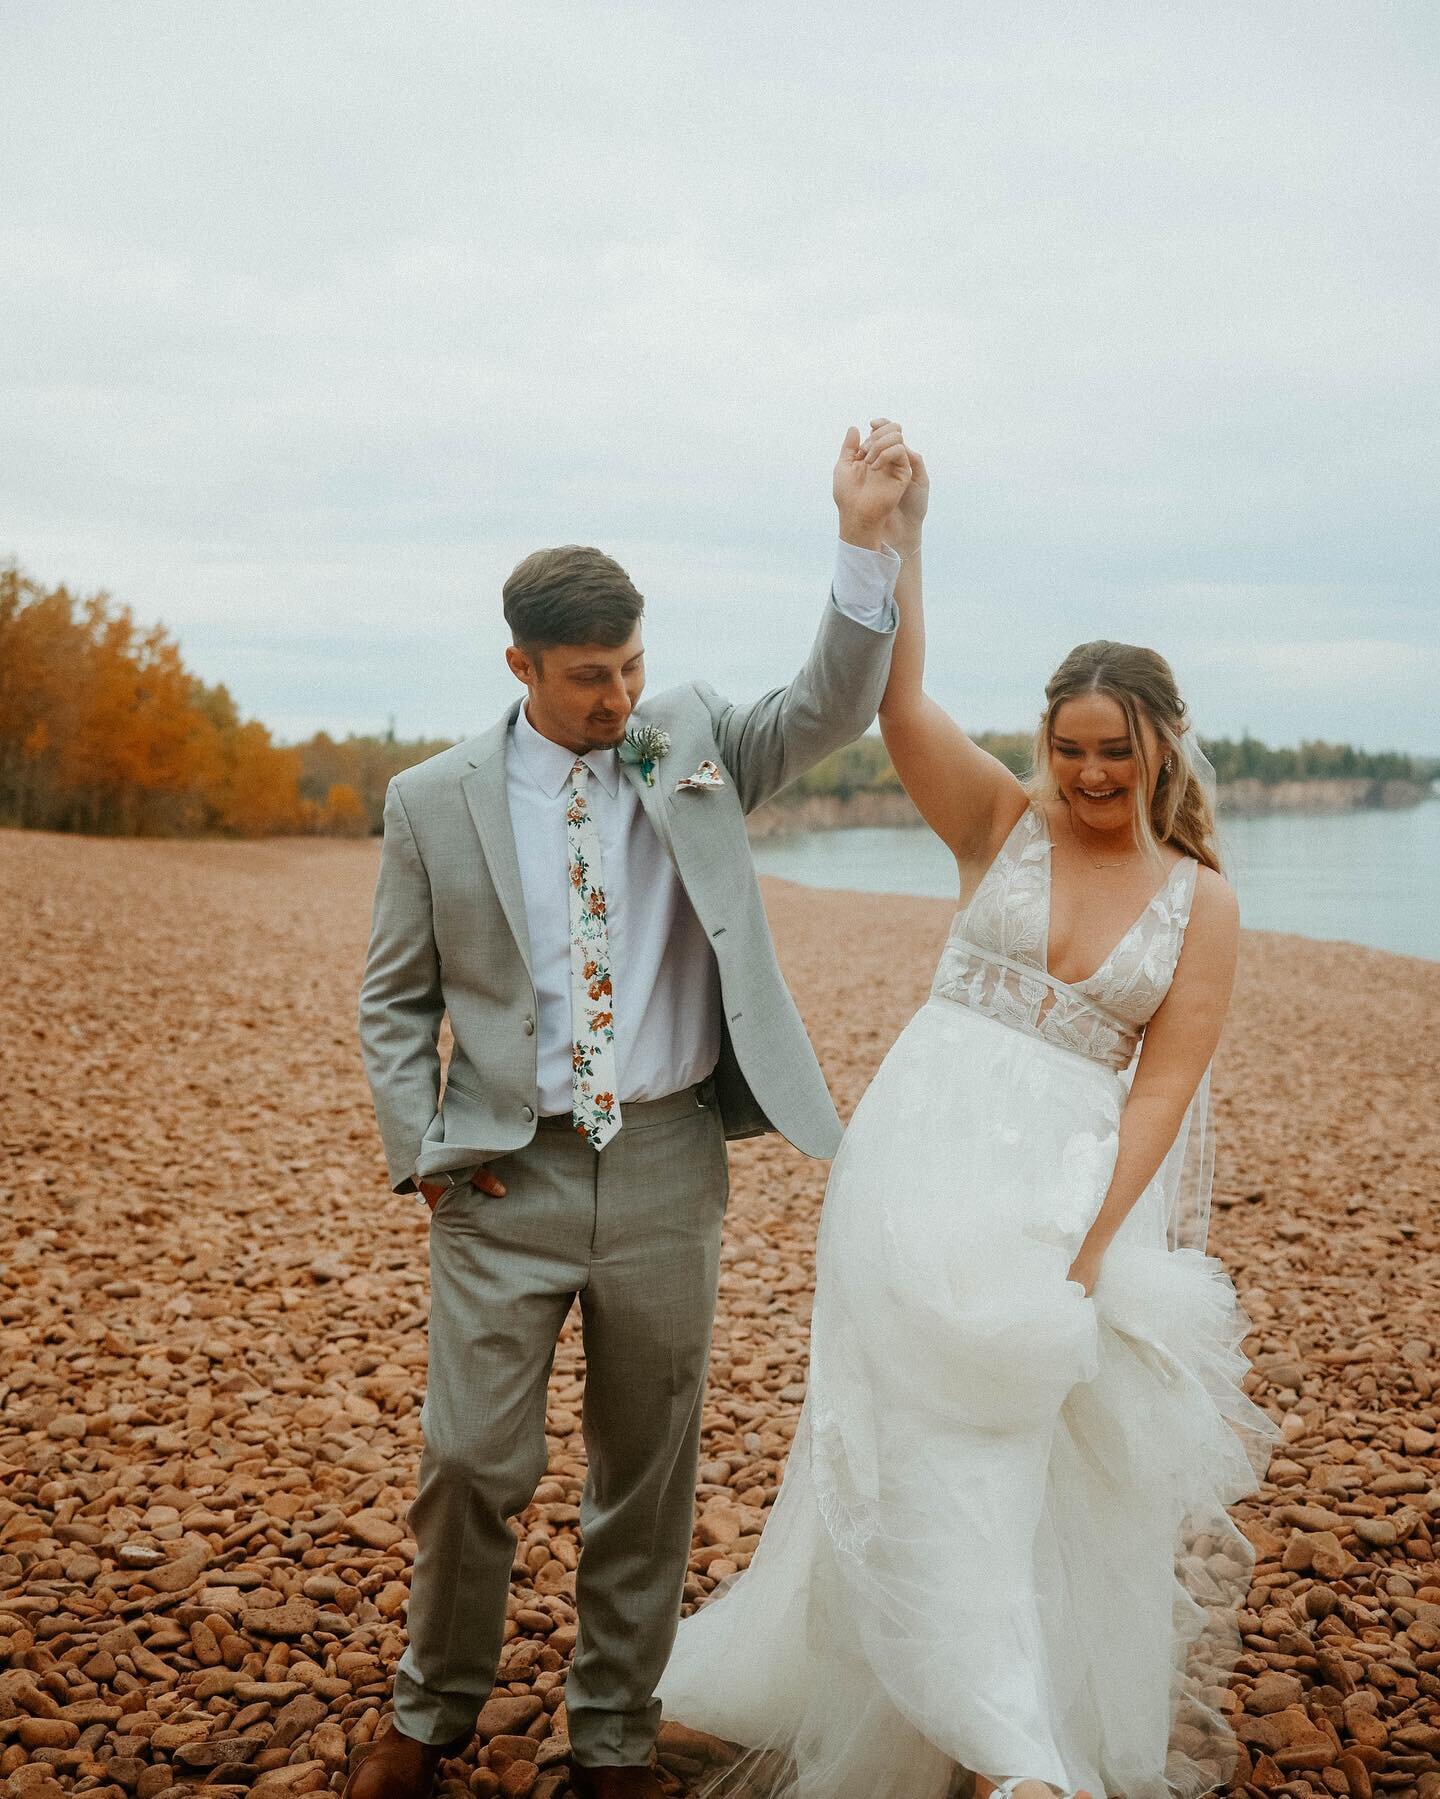 From adventurous elopements, to gorgeous Airbnb weddings&mdash; the north shore has it all! danielabuvatphoto Edited &bull; 6s
Minnesota's north shore is an absolute hidden gem for couples wanting to have a wedding day or engagement session surrounde